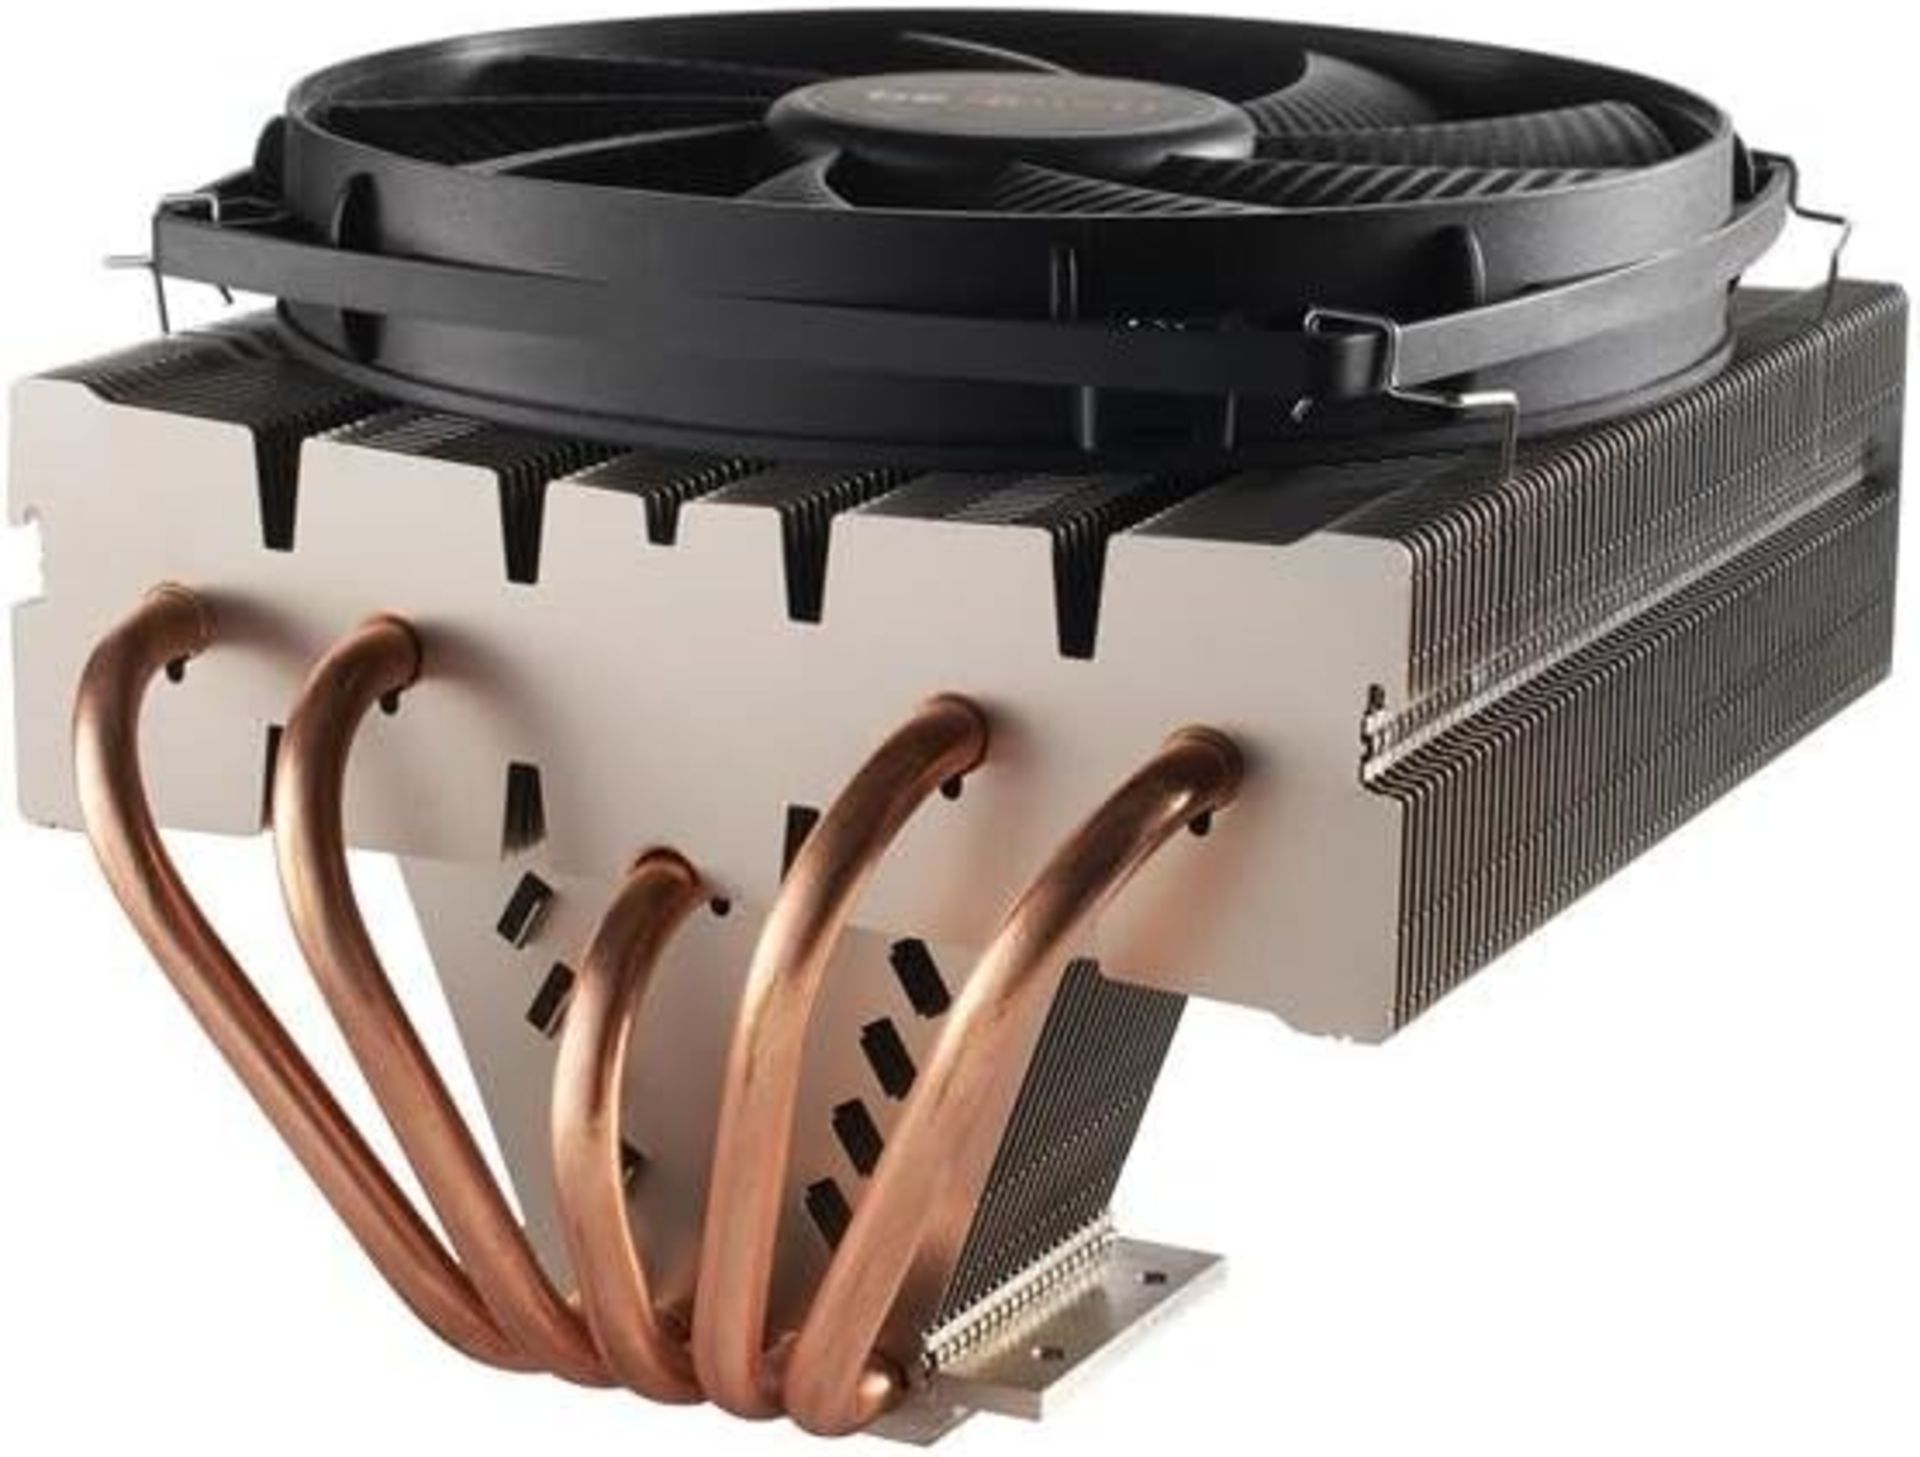 NEW & BOXED BE QUIET! Shadow Rock TF 2 CPU Cooler. RRP £59.99. Shadow Rock TF 2 is the perfect - Image 2 of 7